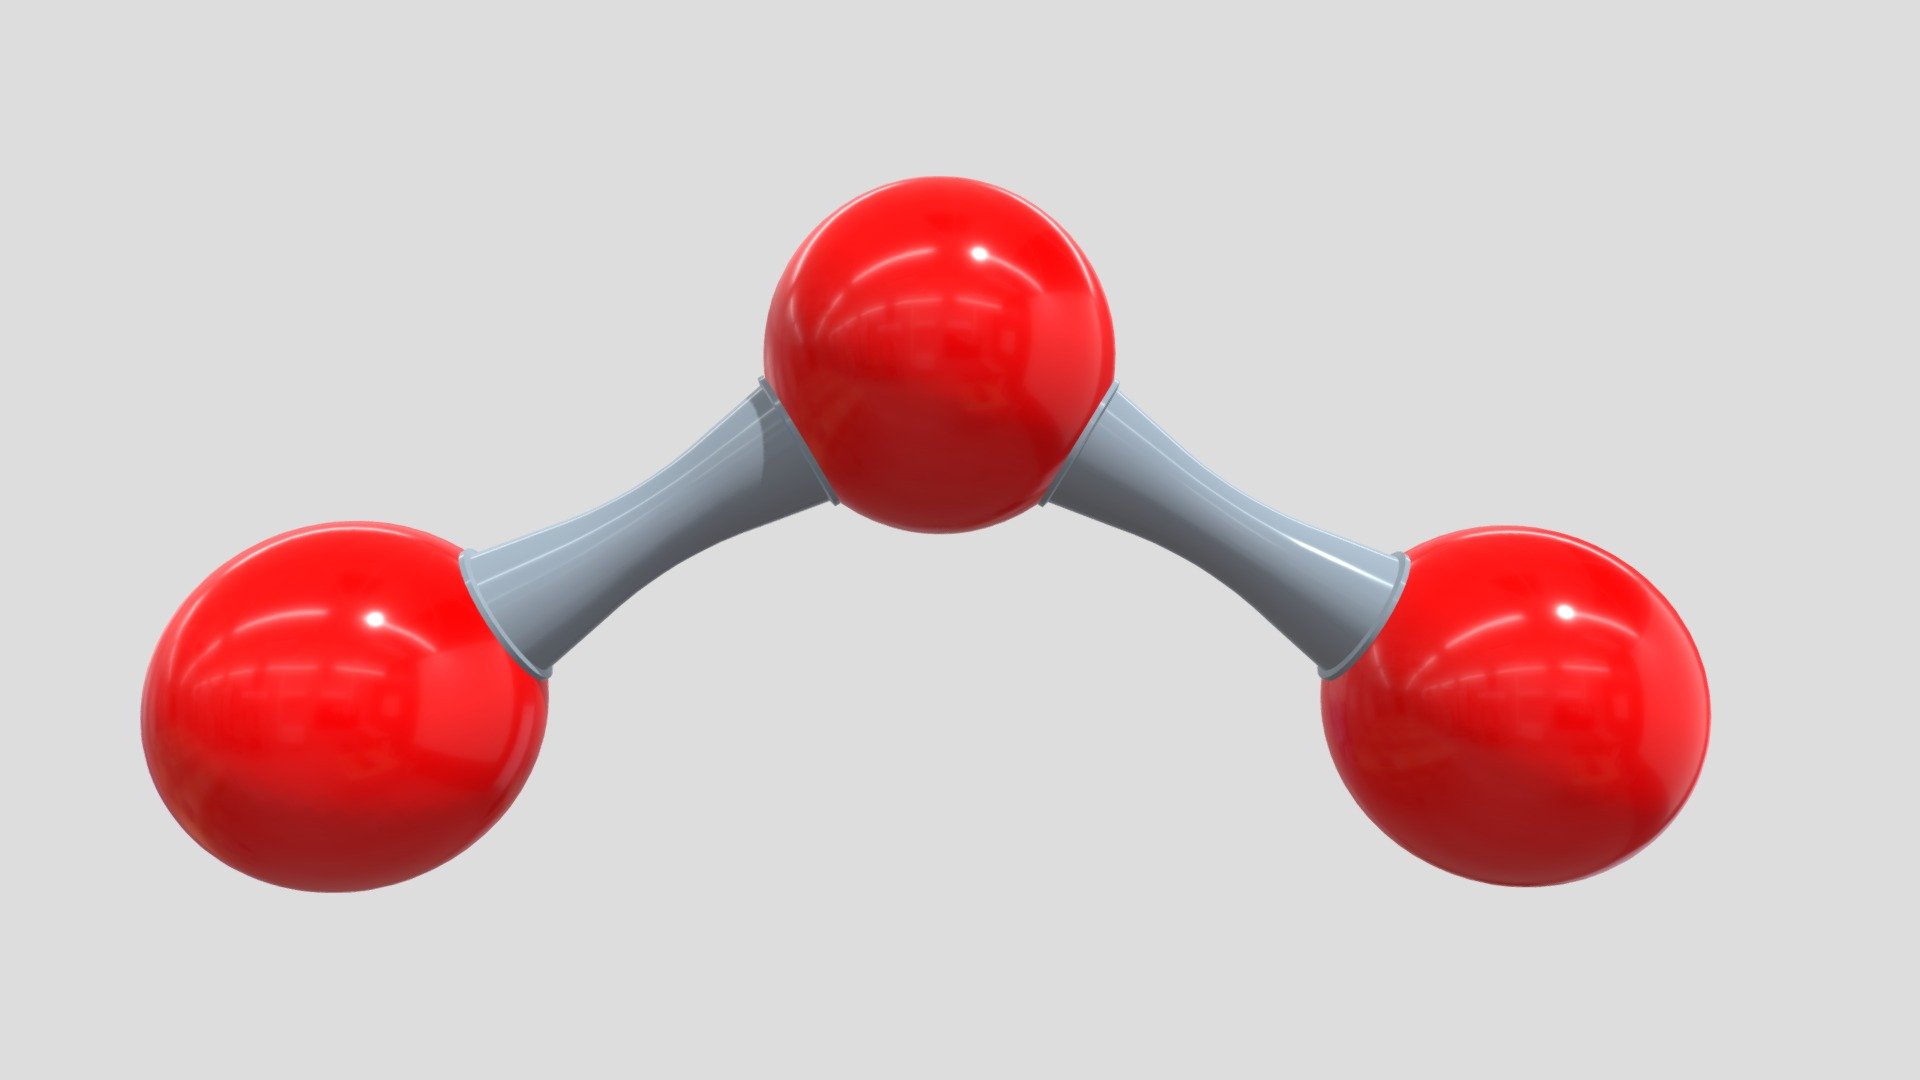 -O3 Ozone Molecule.

-This product contains 5 models.

-This product was created in Blender 2.8.

-Total vertices: 7,324 , Total polygons: 7,368.

-Formats: blend, fbx, obj, c4d, dae, fbx.

-We hope you enjoy this model.

-Thank you 3d model